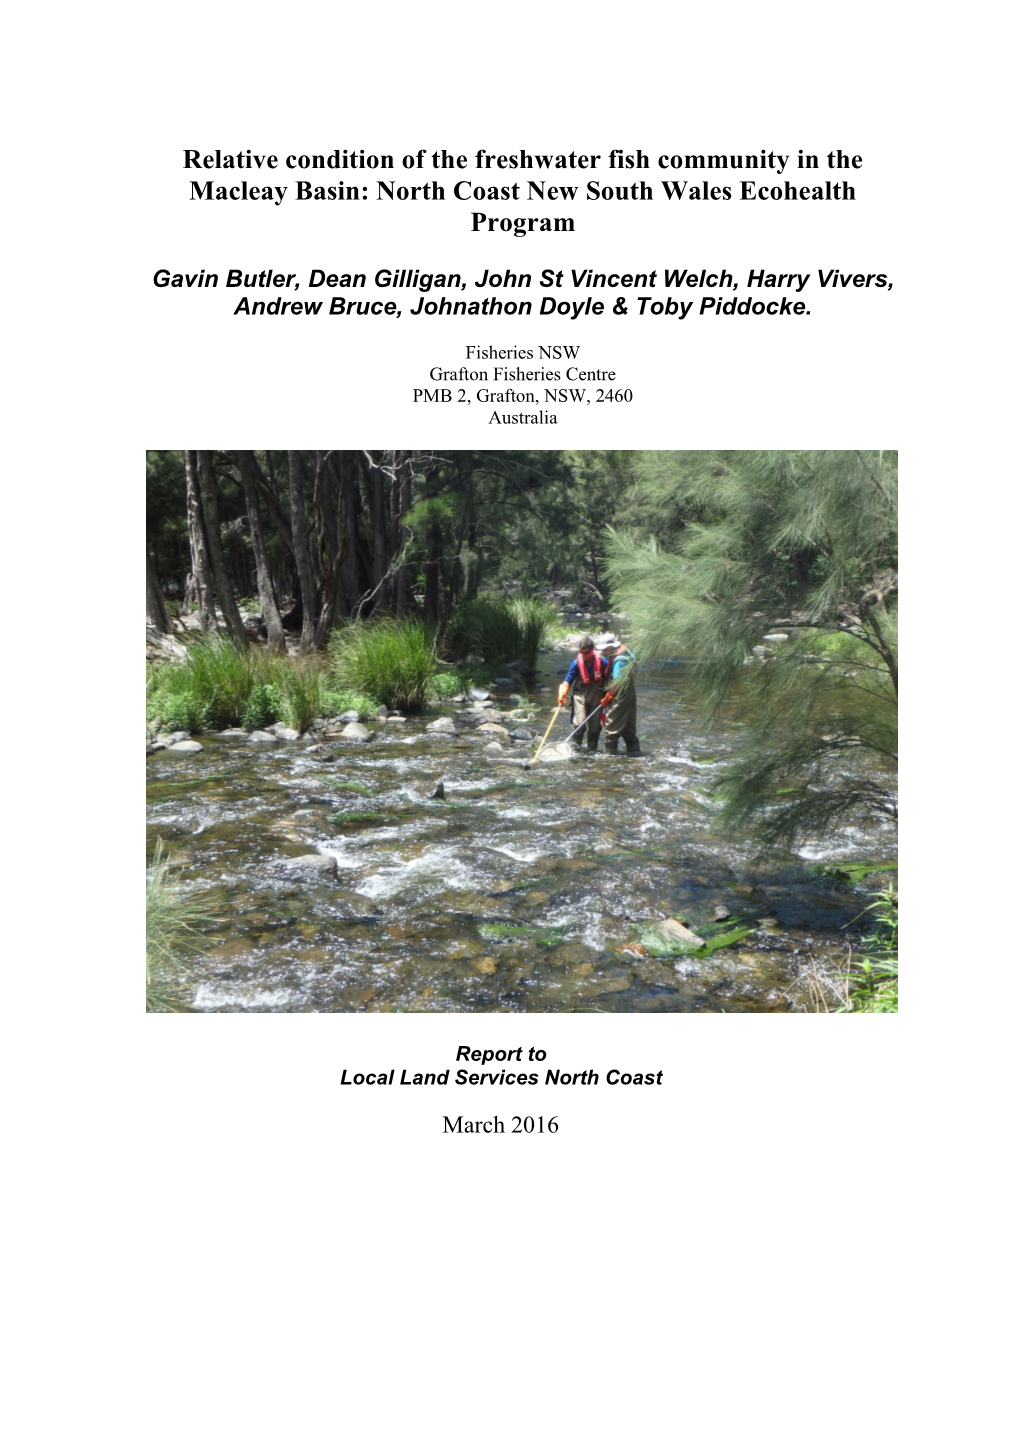 Relative Condition of the Freshwater Fish Community in the Macleay Basin: North Coast New South Wales Ecohealth Program